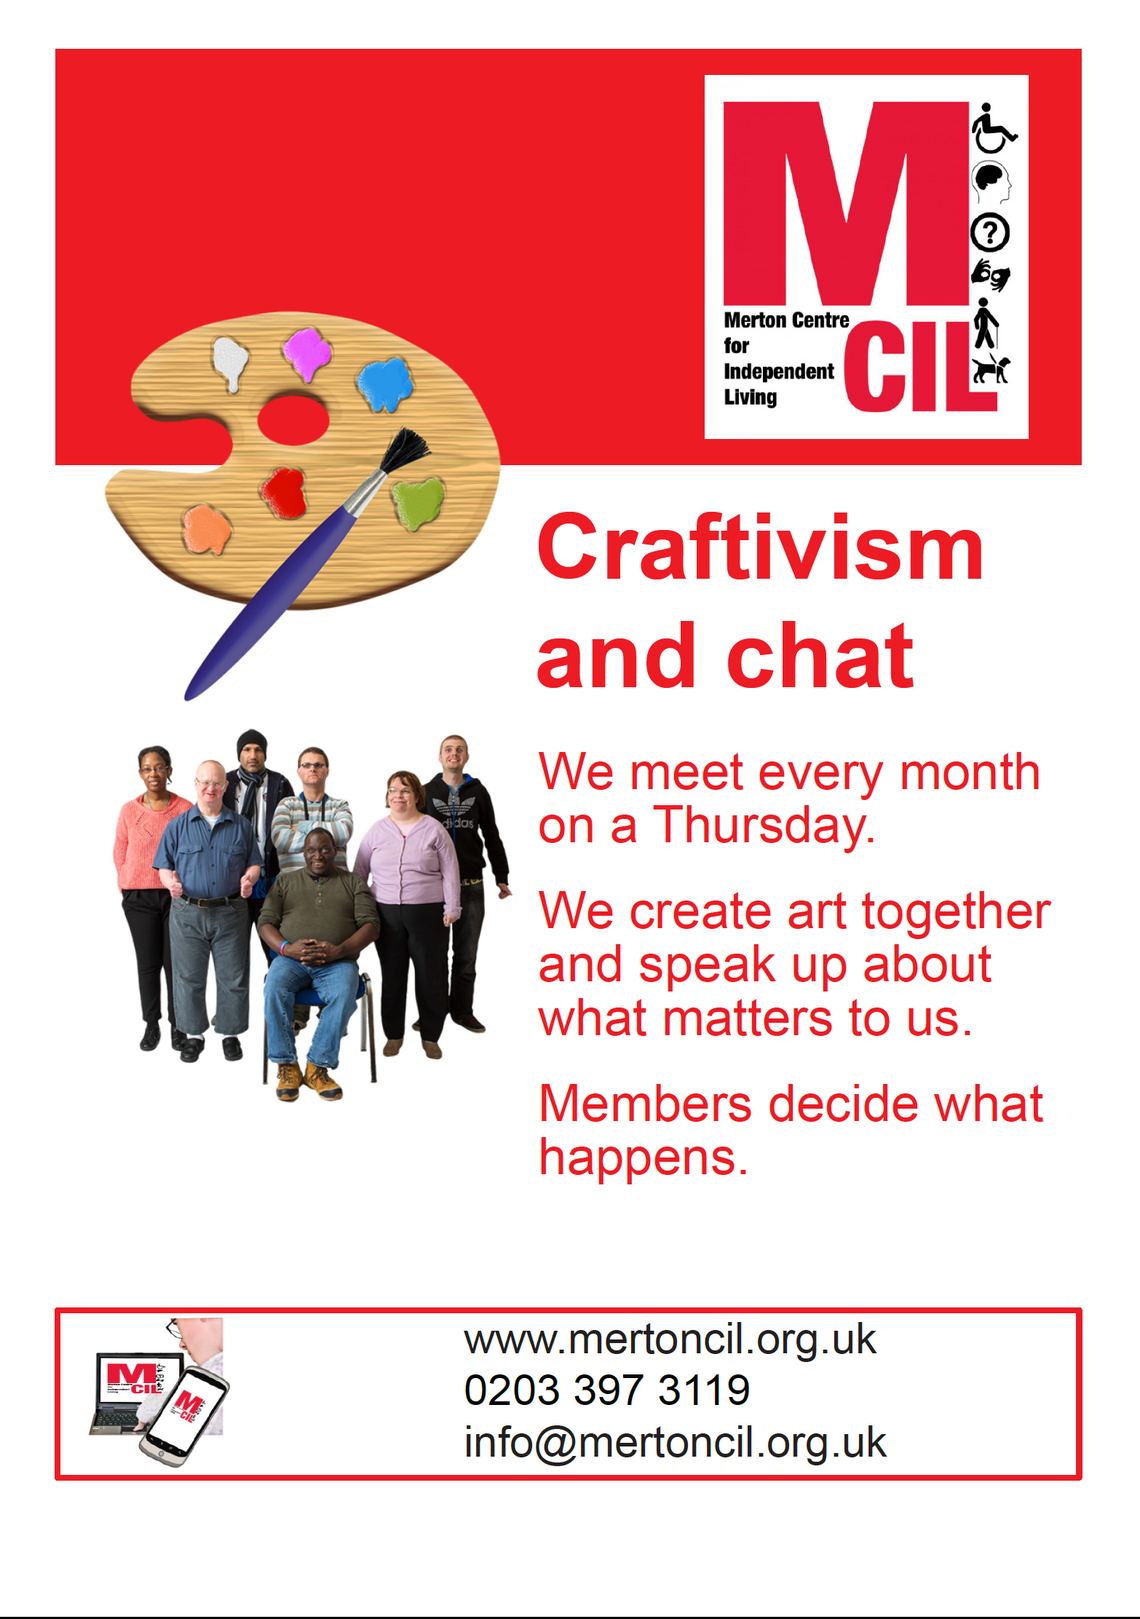 Craftivism and Chat Easy Read Leaflet (download below)